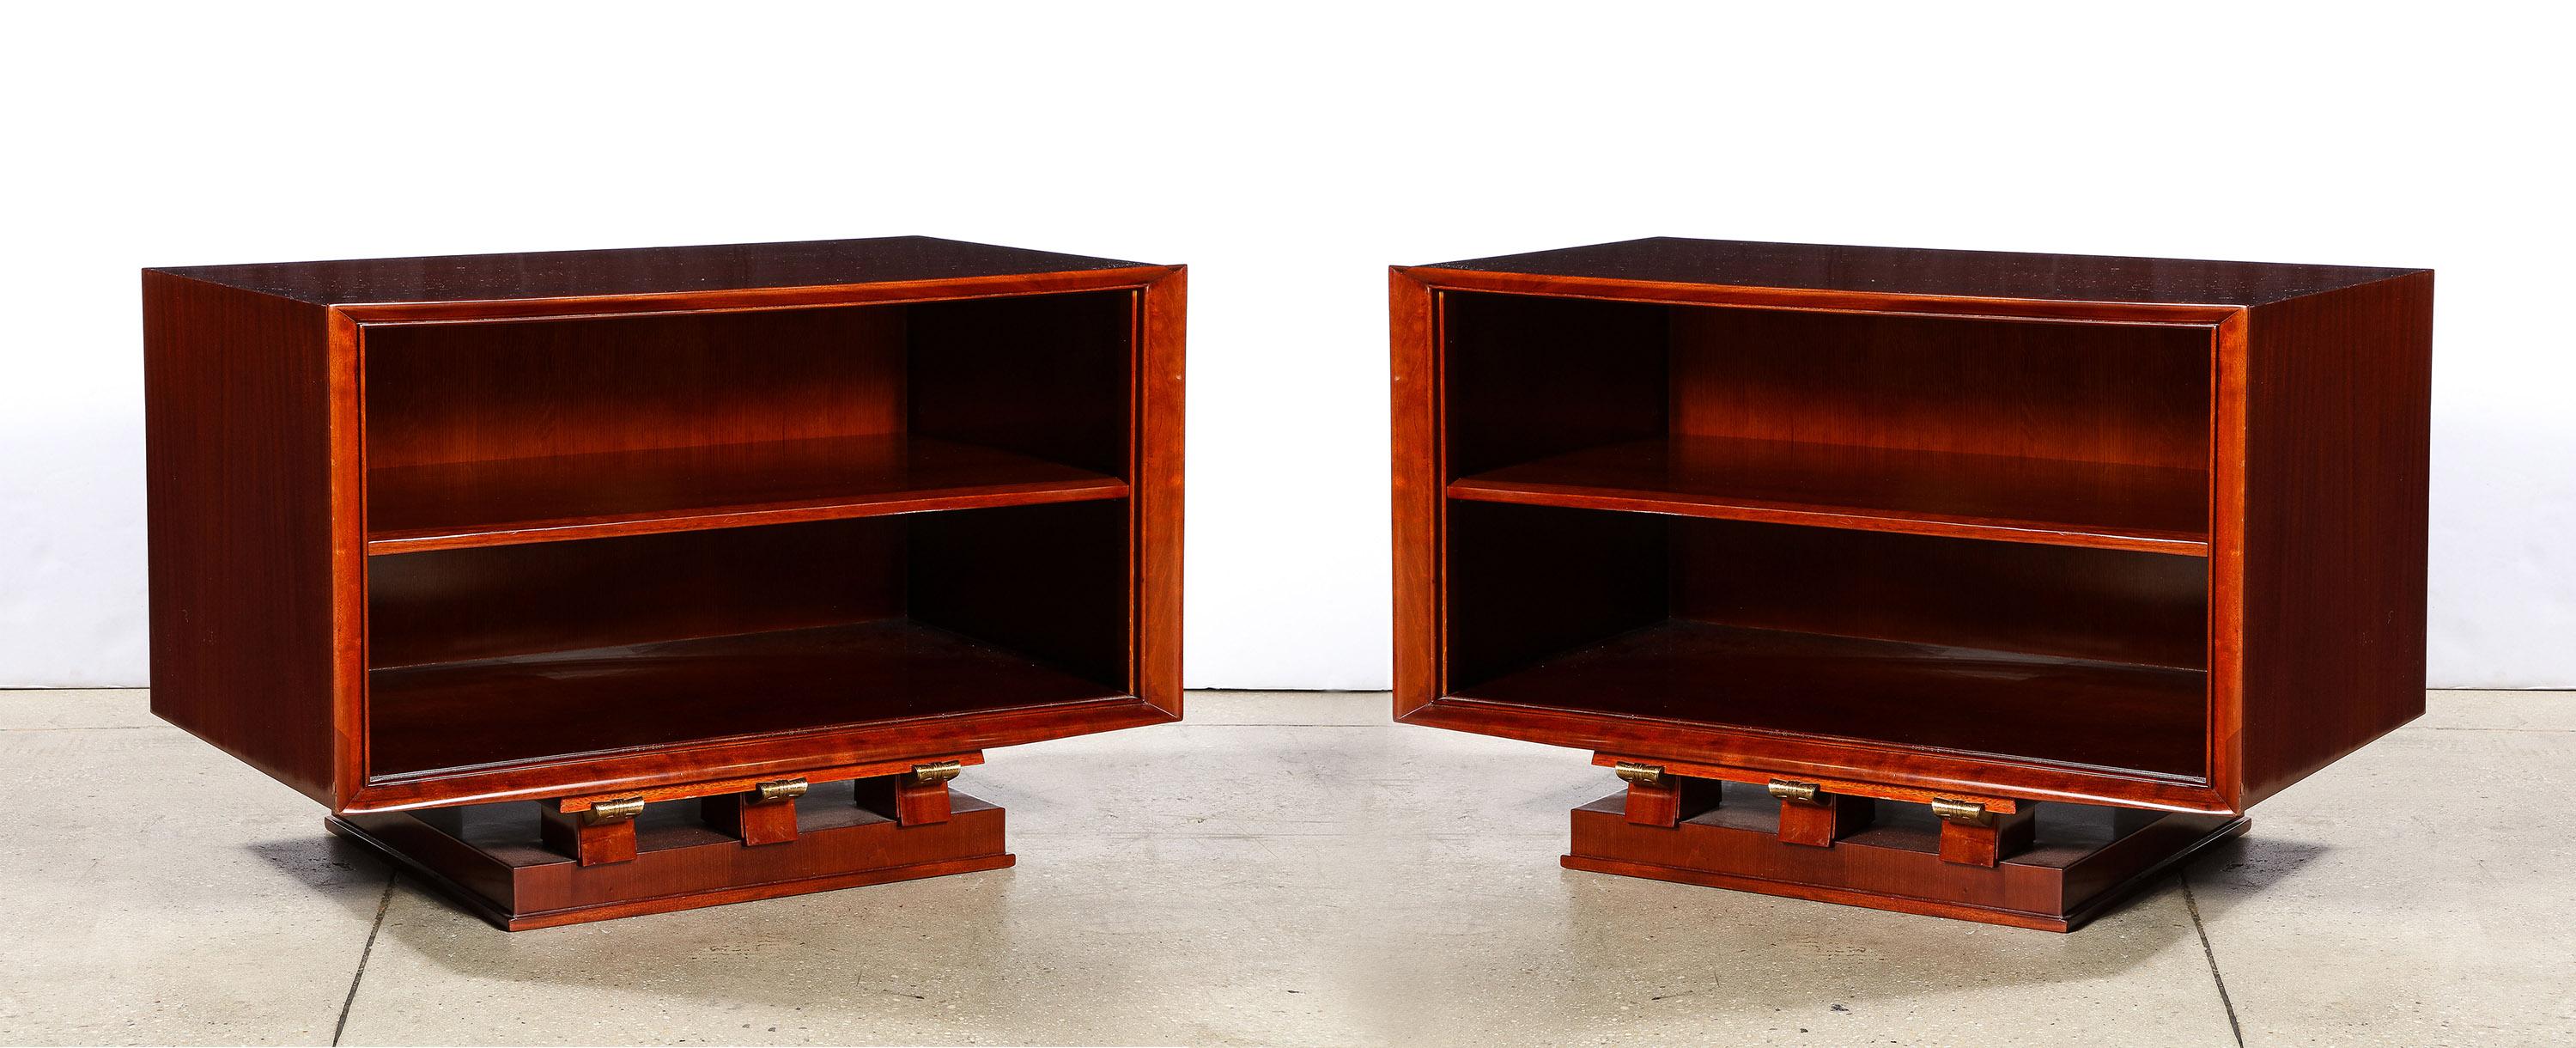 The pair of tables / cabinets, each with an adjustable shelf, having a framed front and atop a rectangular plinth with gilded bronze accents. 

Each signed on back 